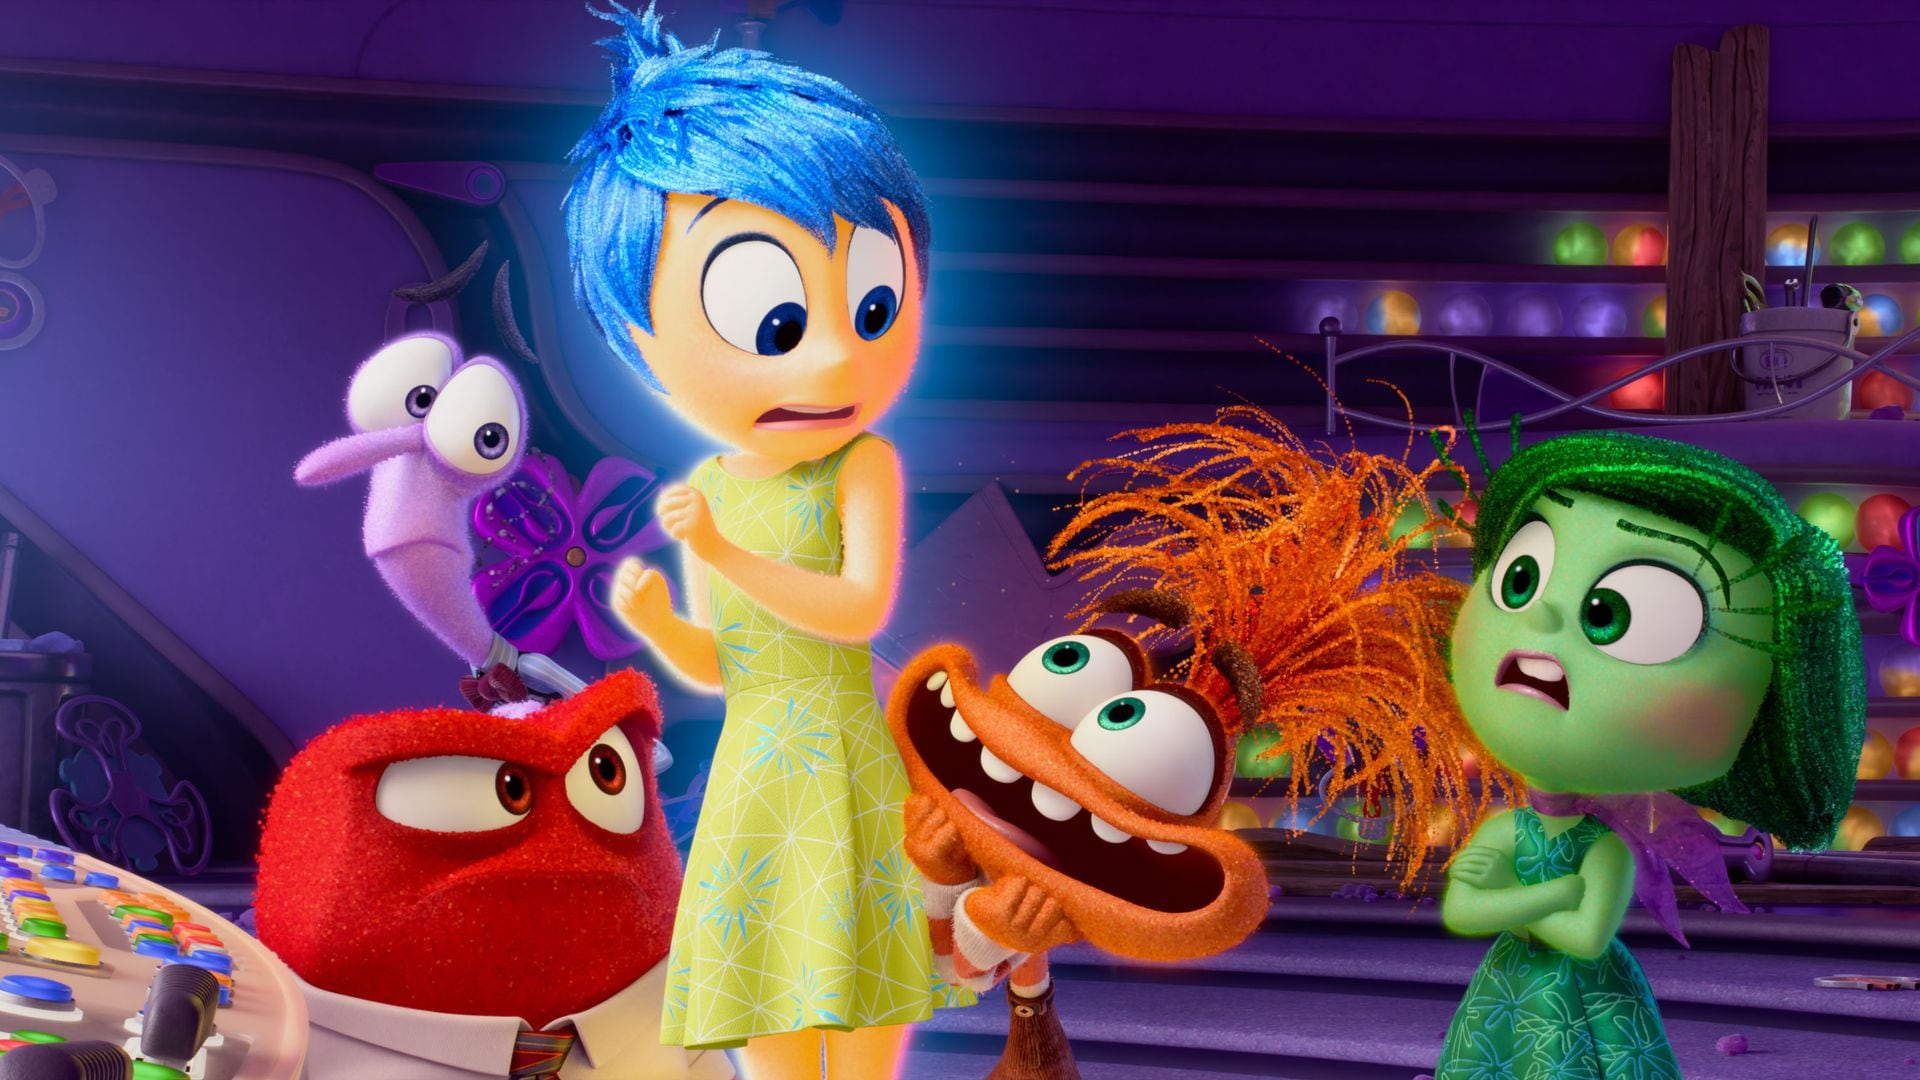 Understanding emotions through 'Inside Out': A look at Robert Plutchik's theory